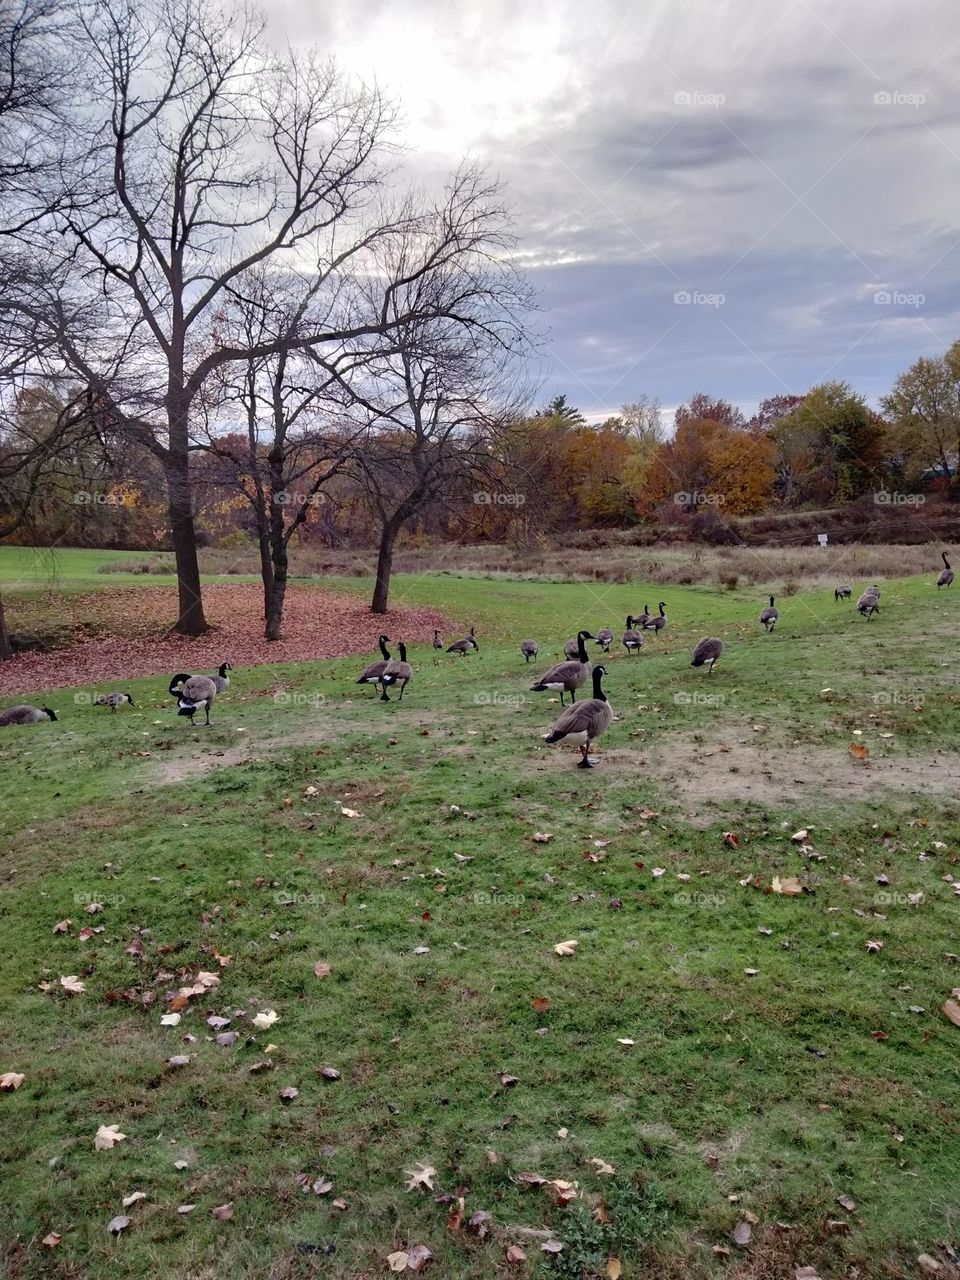 Park in my hometown, the geese are not scared of people.  Also high school football field here as well.